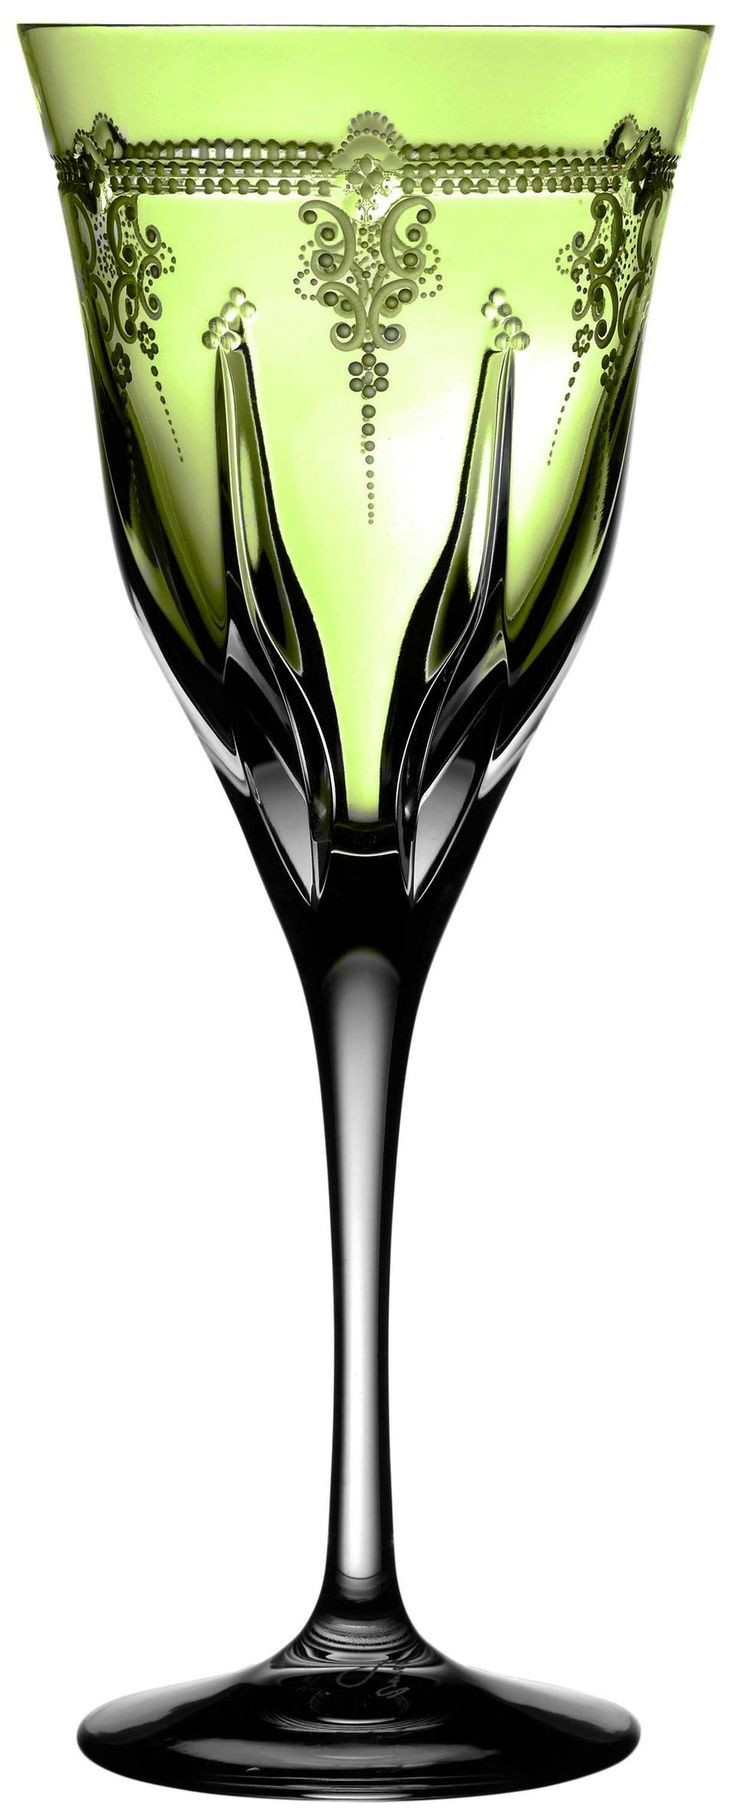 21 Spectacular William Yeoward Crystal Vase 2023 free download william yeoward crystal vase of 438 best vestir la mesa images on pinterest dishes floral in lisbon yellow green water glass varga in yardley pa